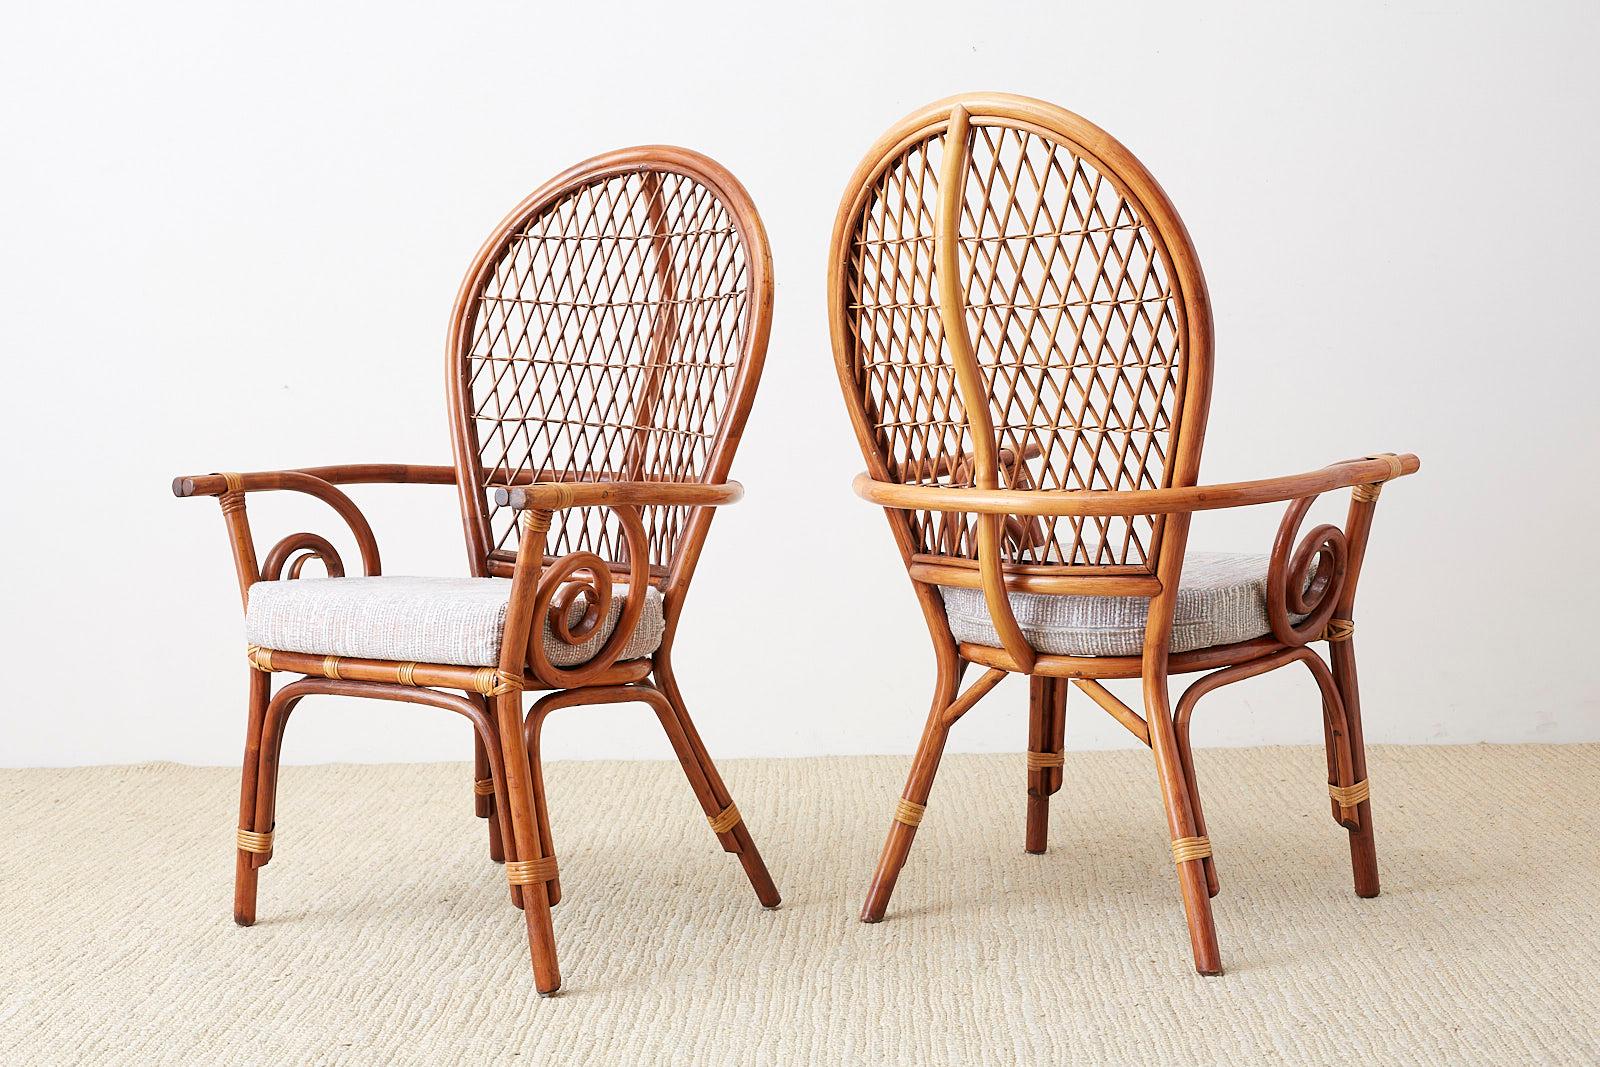 Midcentury set of four peacock or fanback dining armchairs. Made in the Hollywood Florida Regency style from bamboo rattan poles. Featuring a balloon back with an open lattice fretwork design. The flat horseshoe arms have a double bamboo pole with a